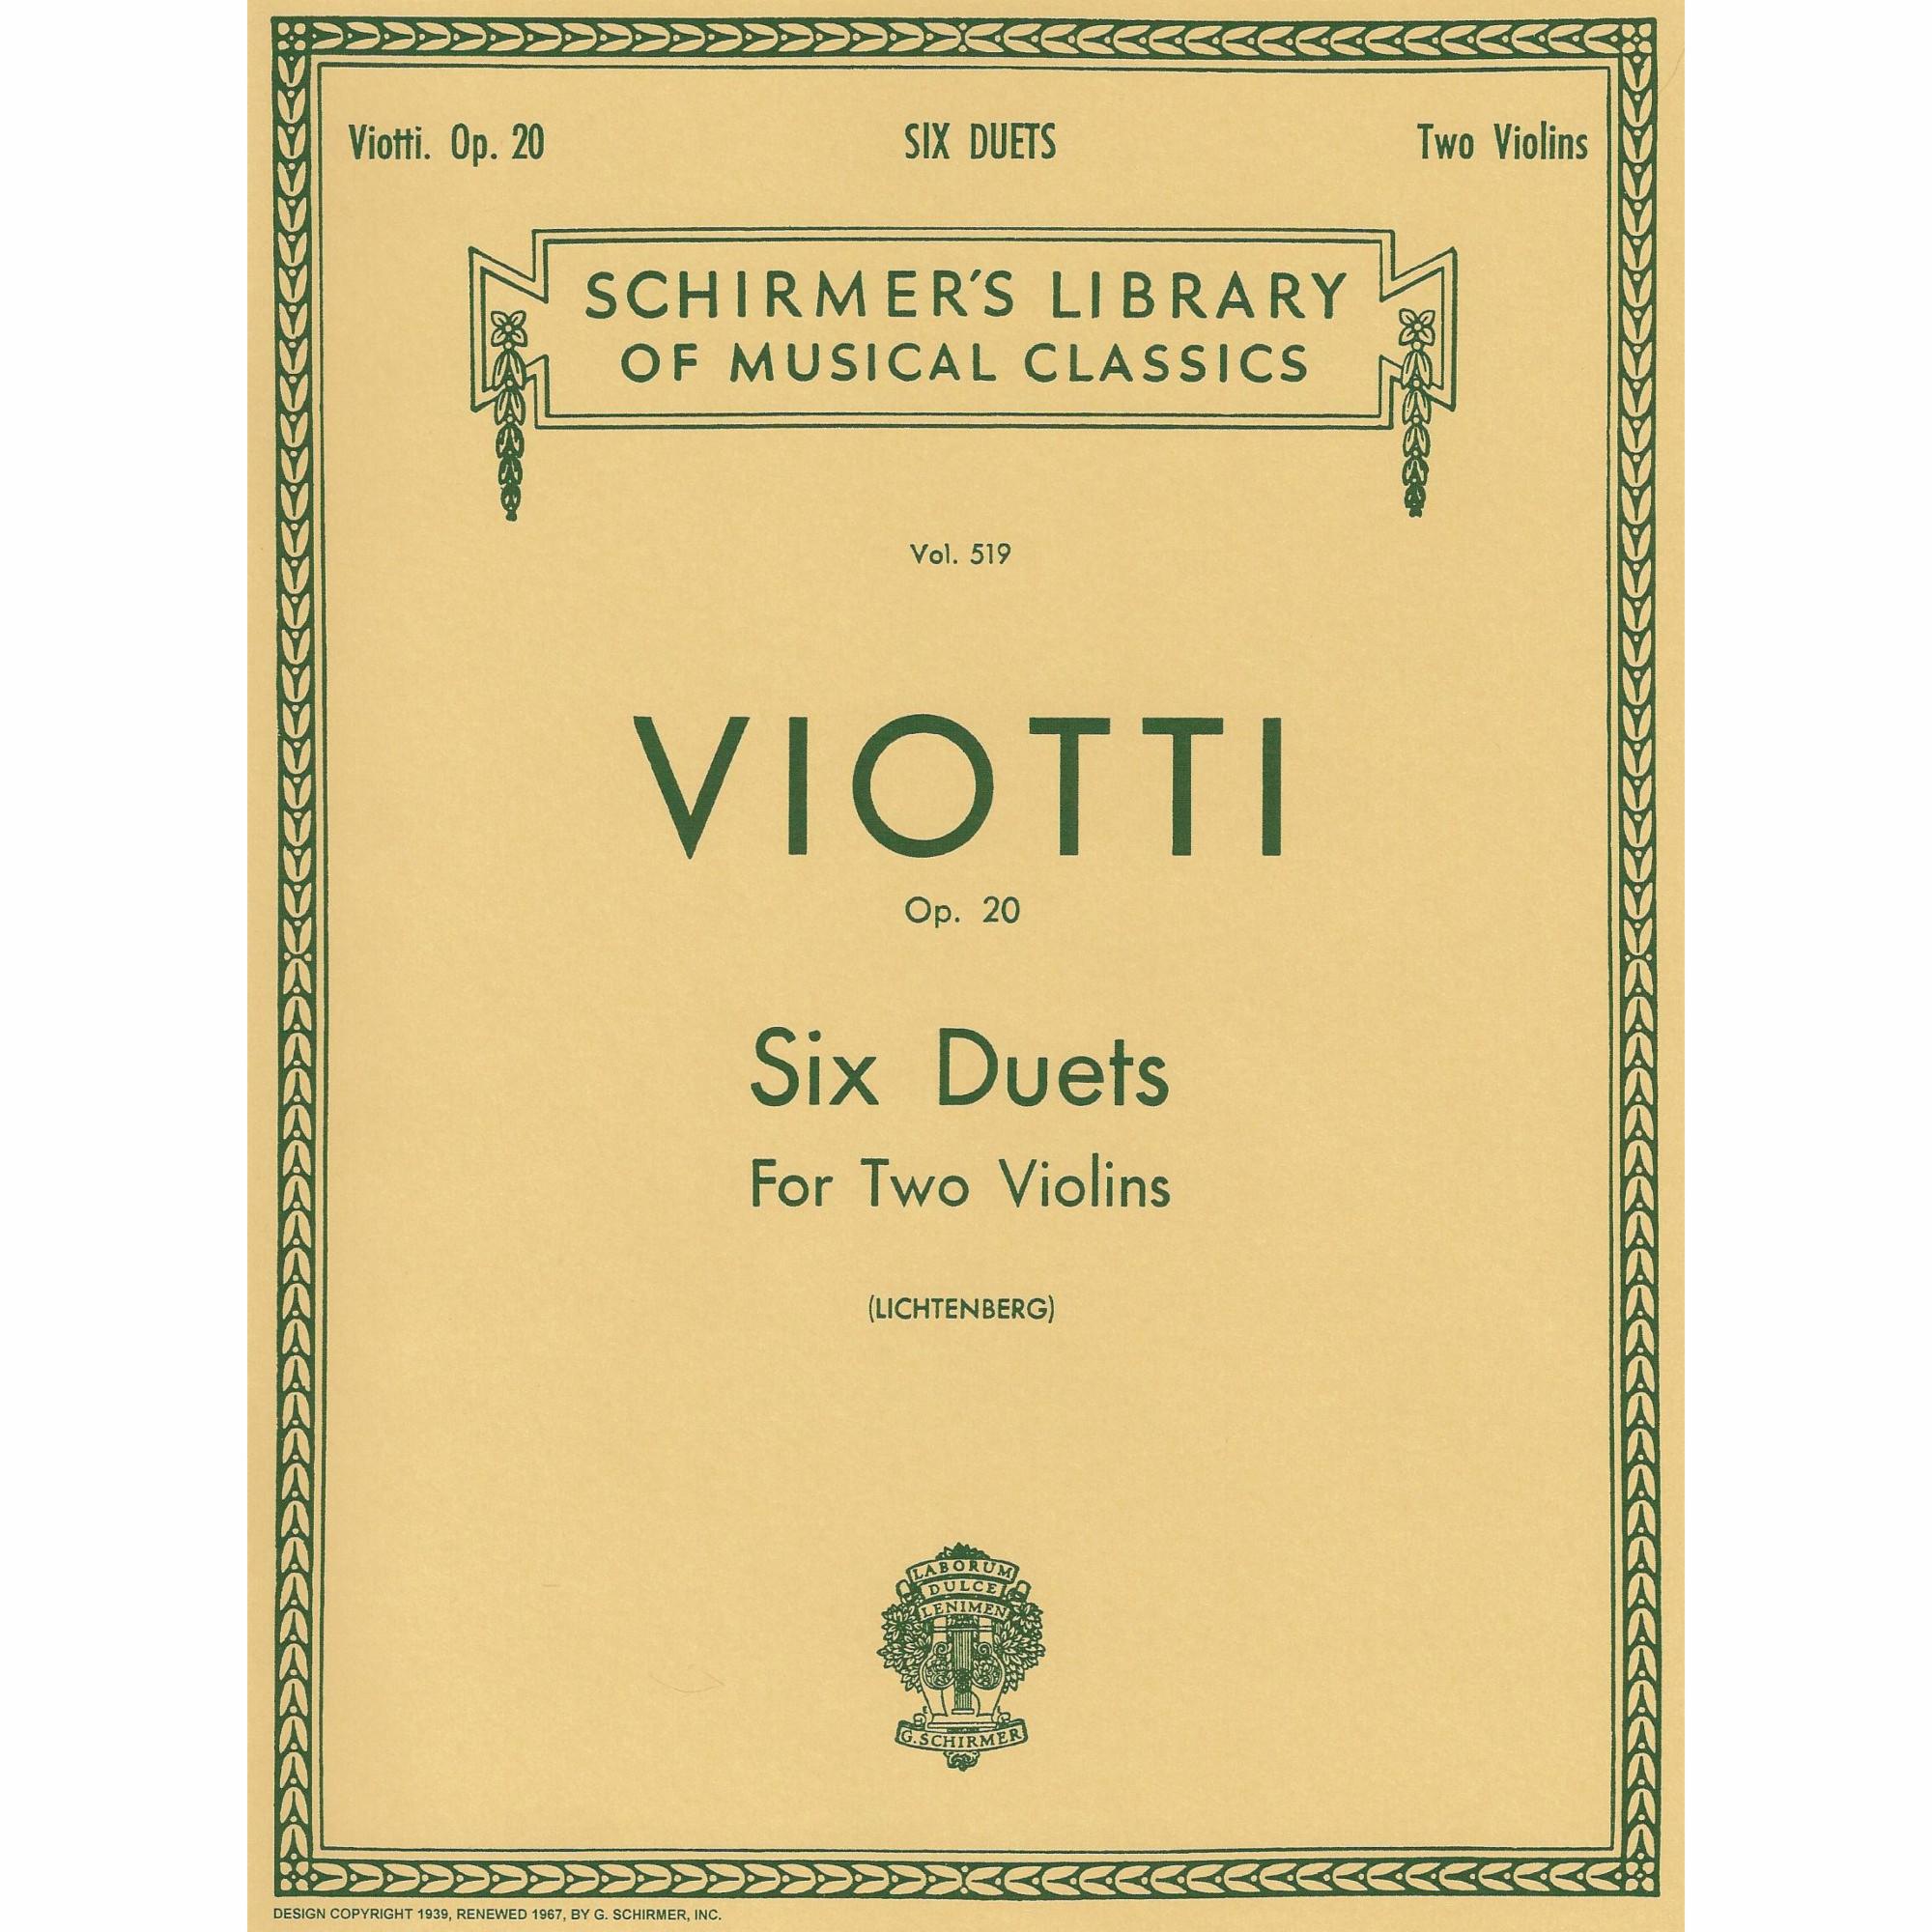 Viotti -- Six Duets, Op. 20 for Two Violins